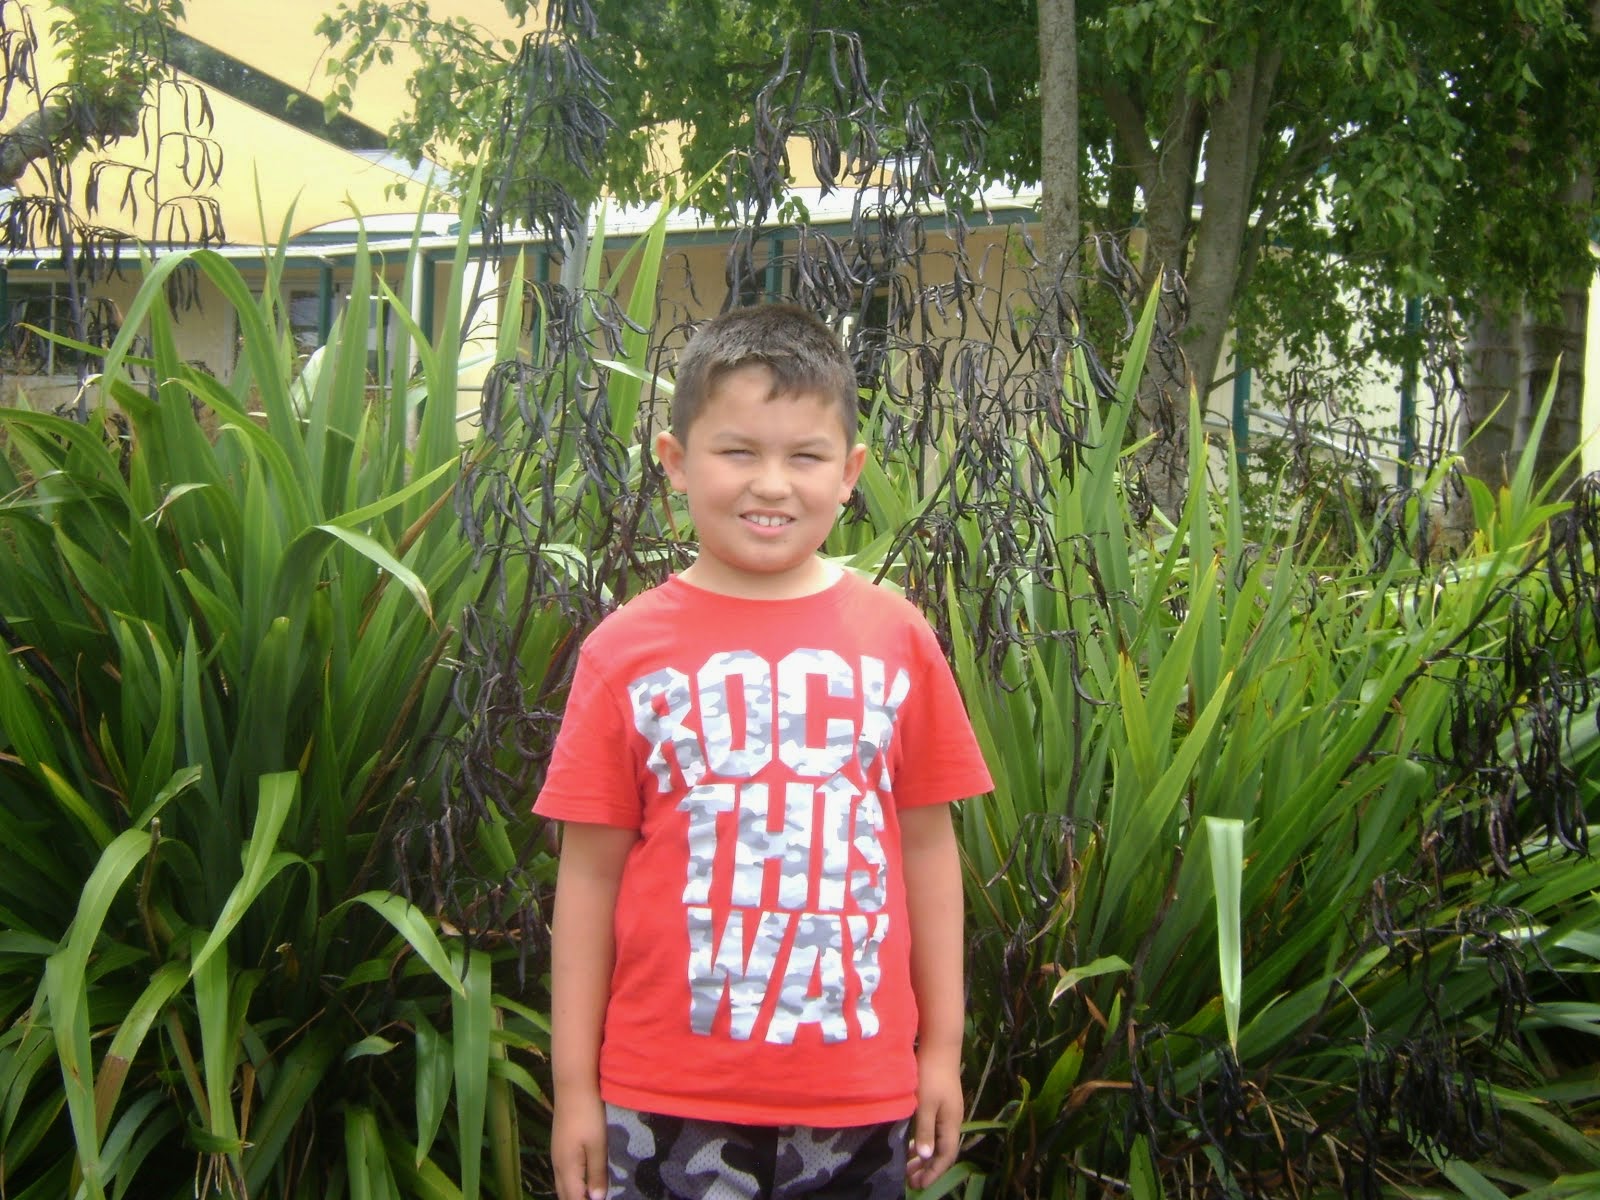 My Name is Aizen and I go to David Street School Morrinsville, New Zealand